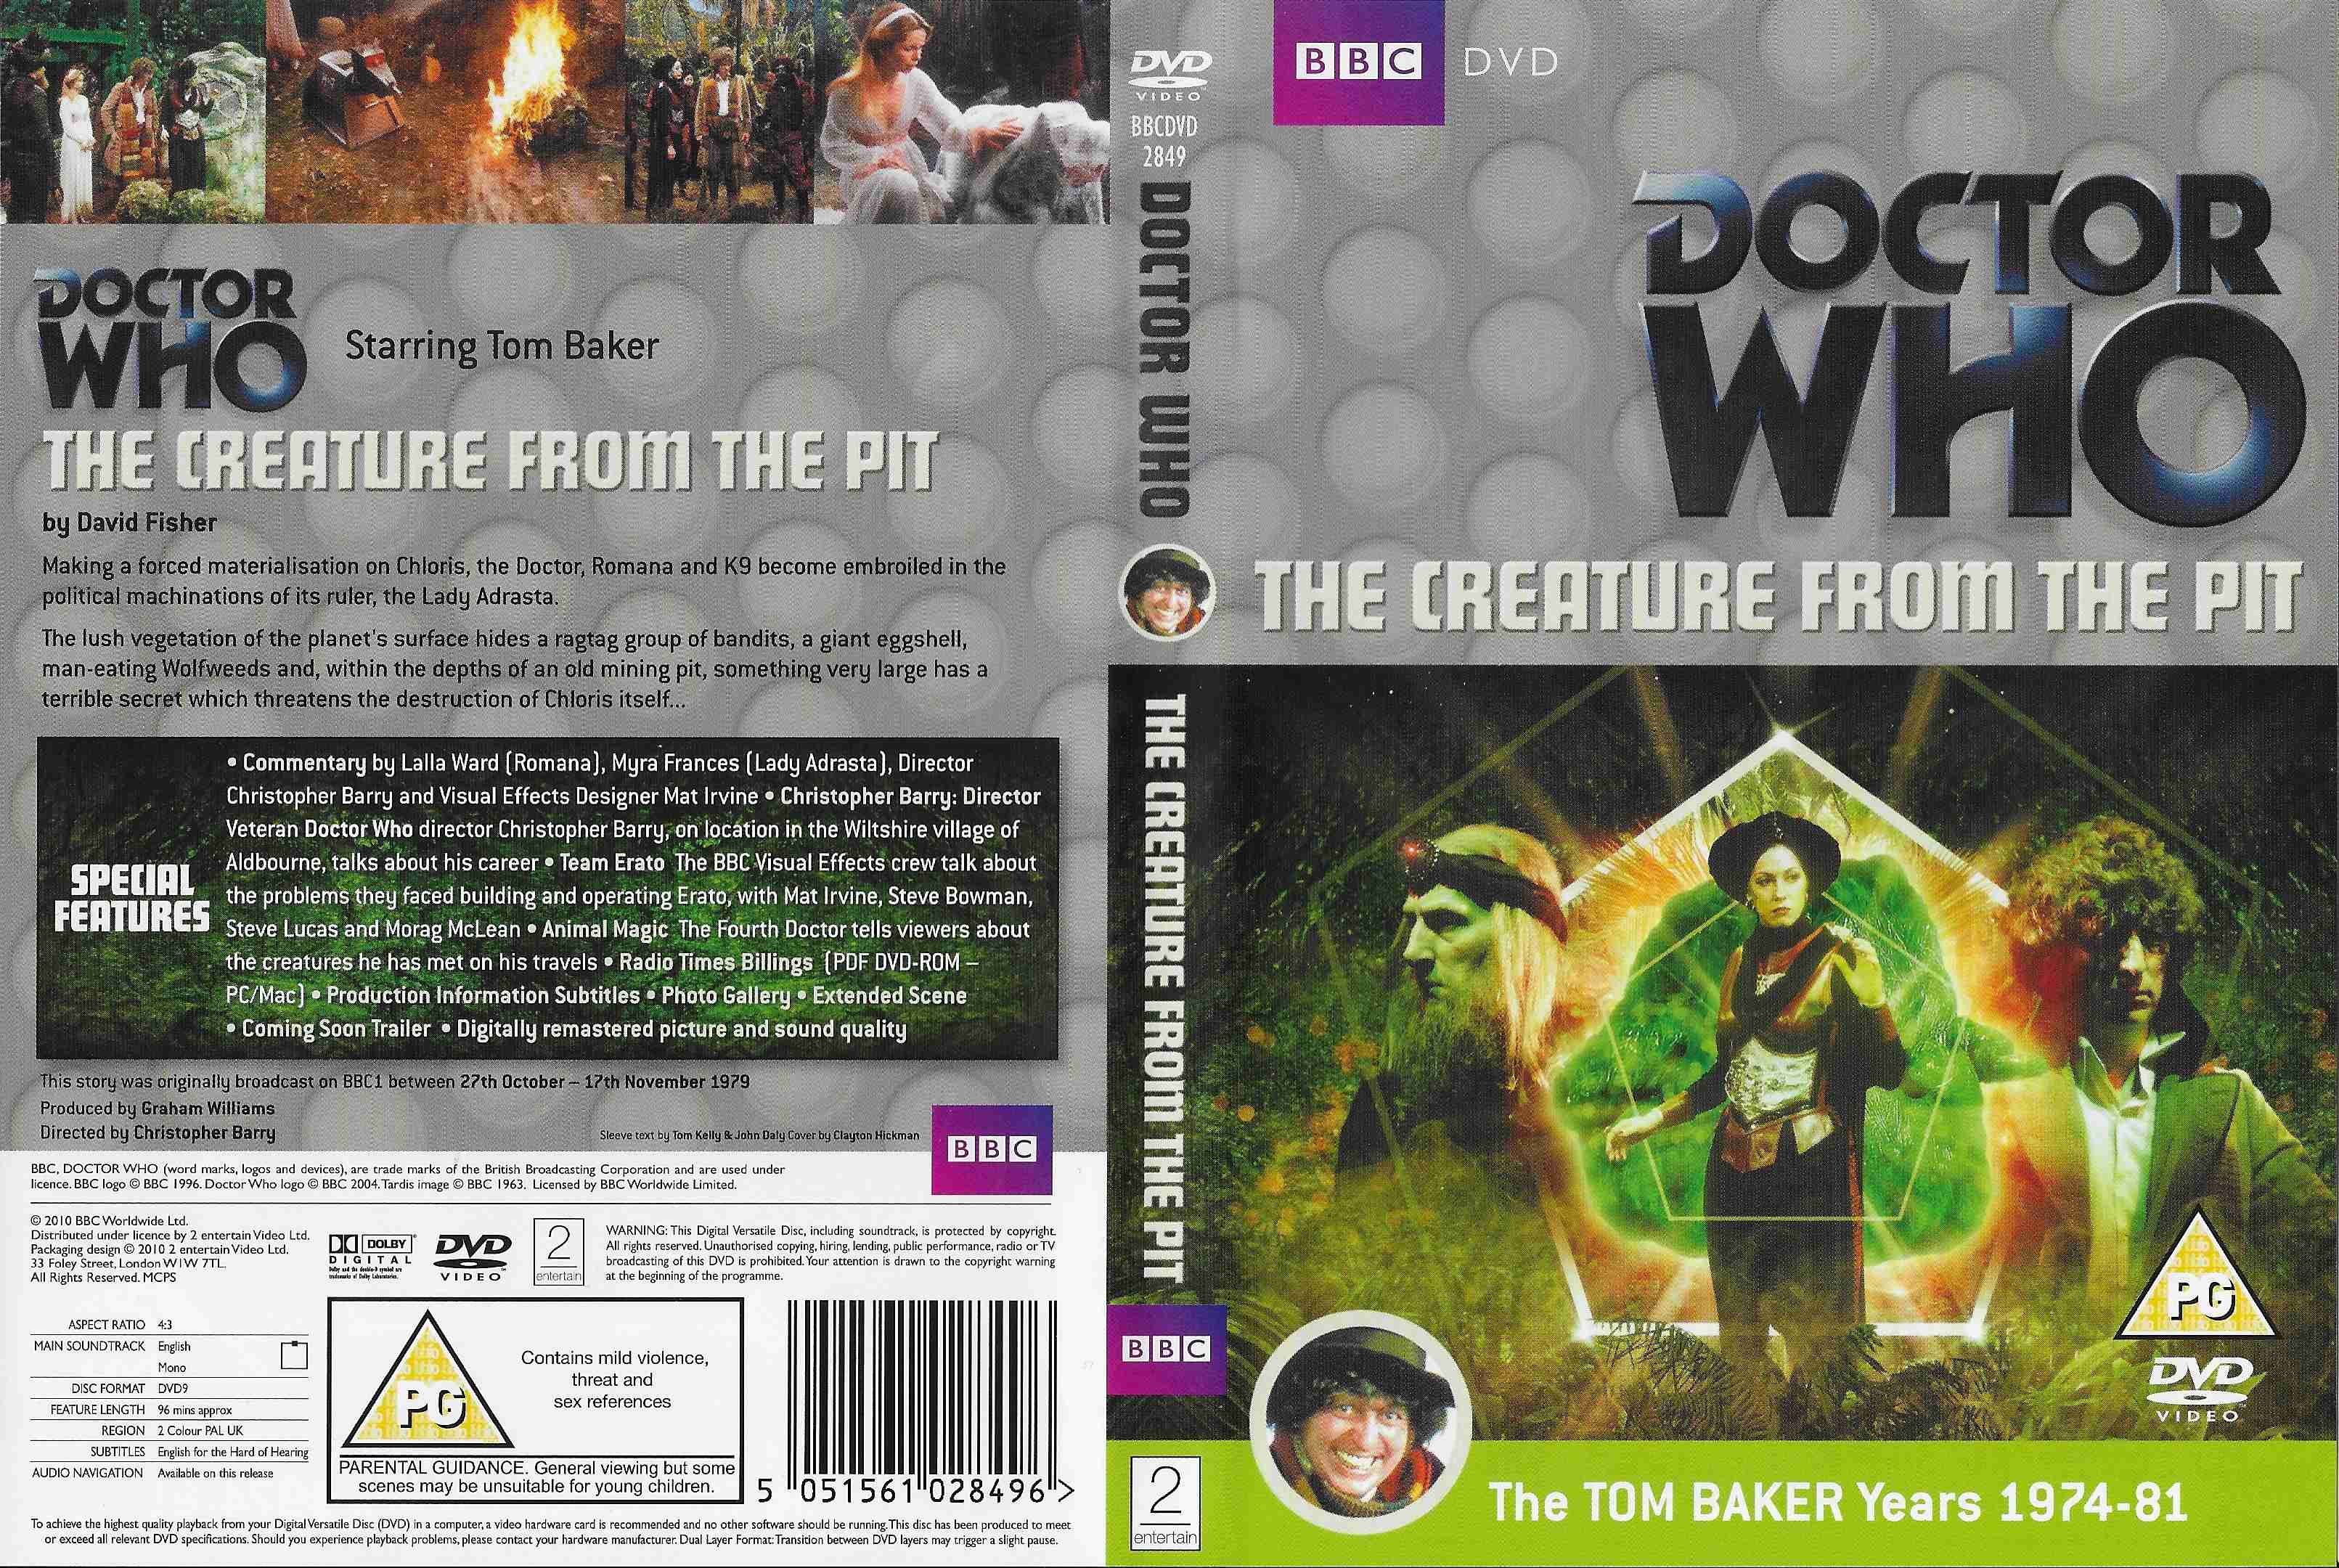 Picture of BBCDVD 2849 Doctor Who - The creature from the pit by artist David Fisher from the BBC records and Tapes library